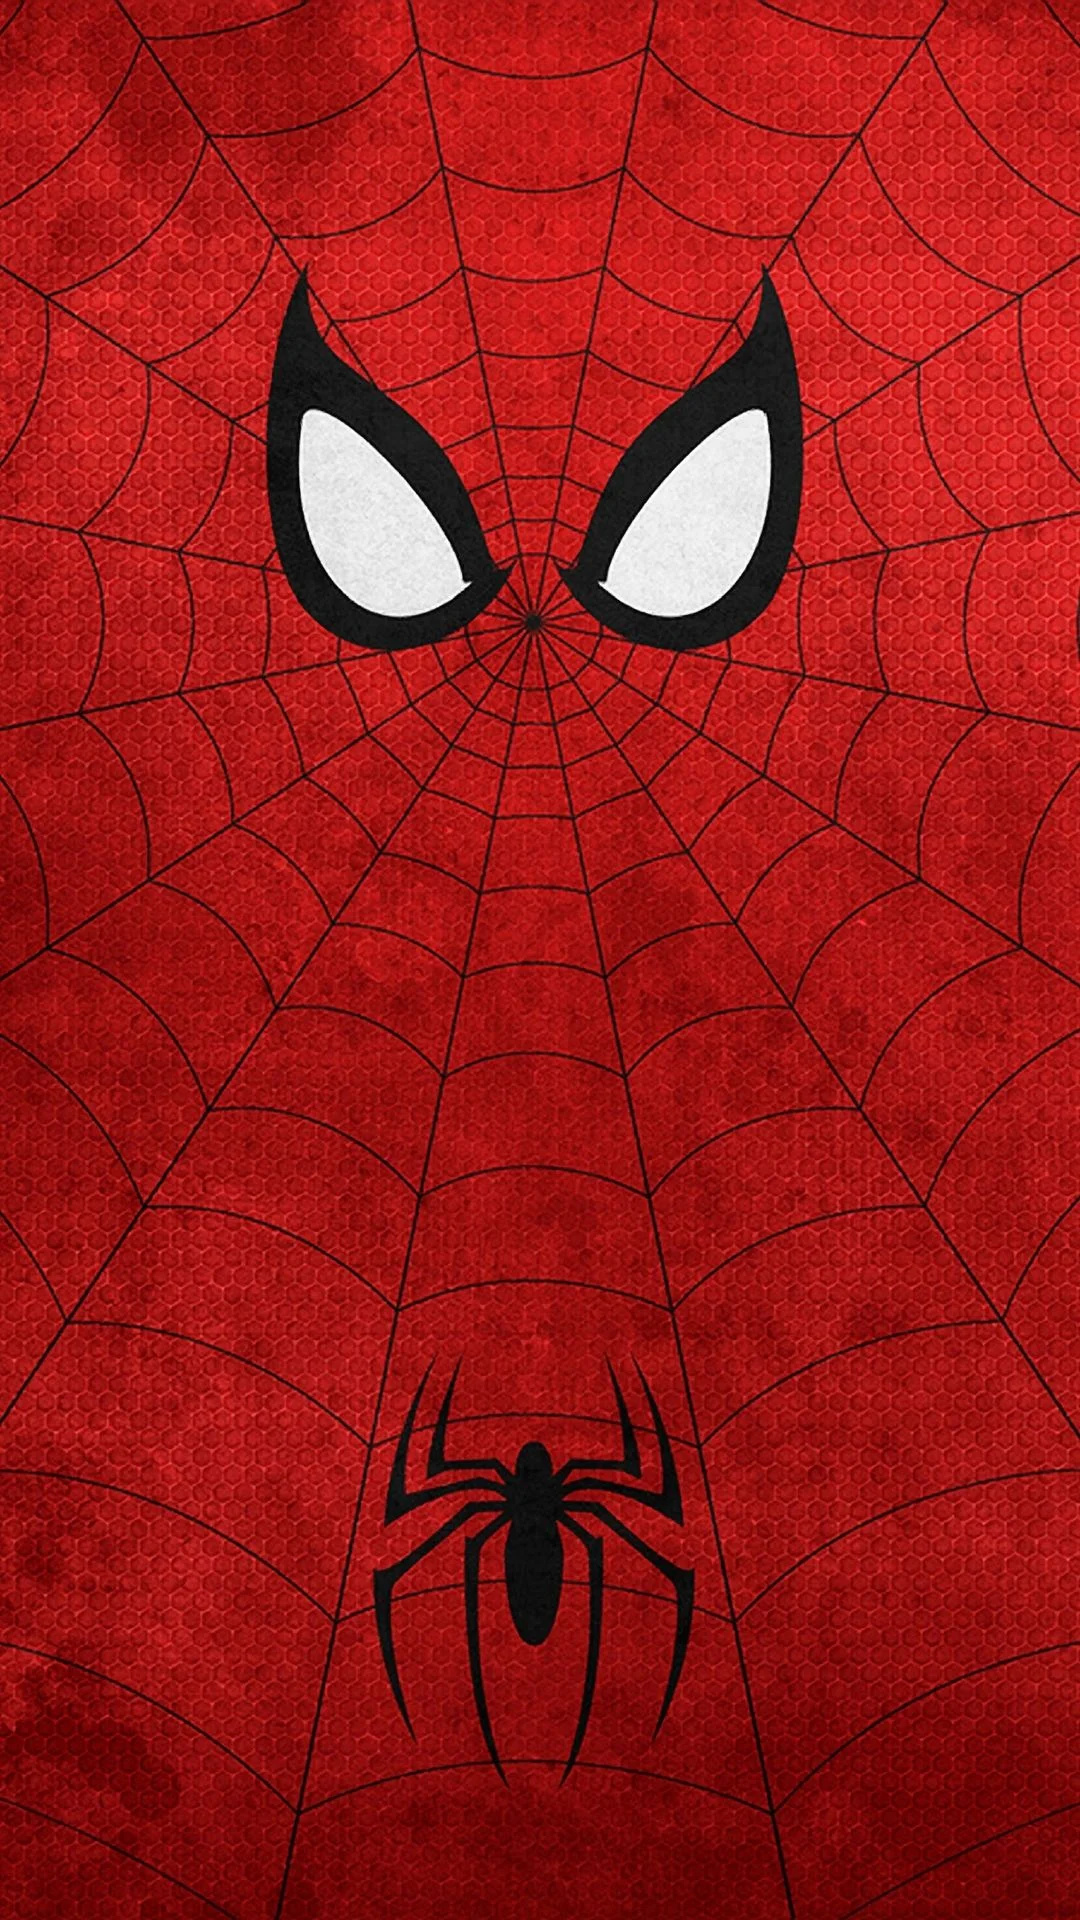 Spider-Man cellphone wallpapers, Top free backgrounds, 1080x1920 Full HD Phone